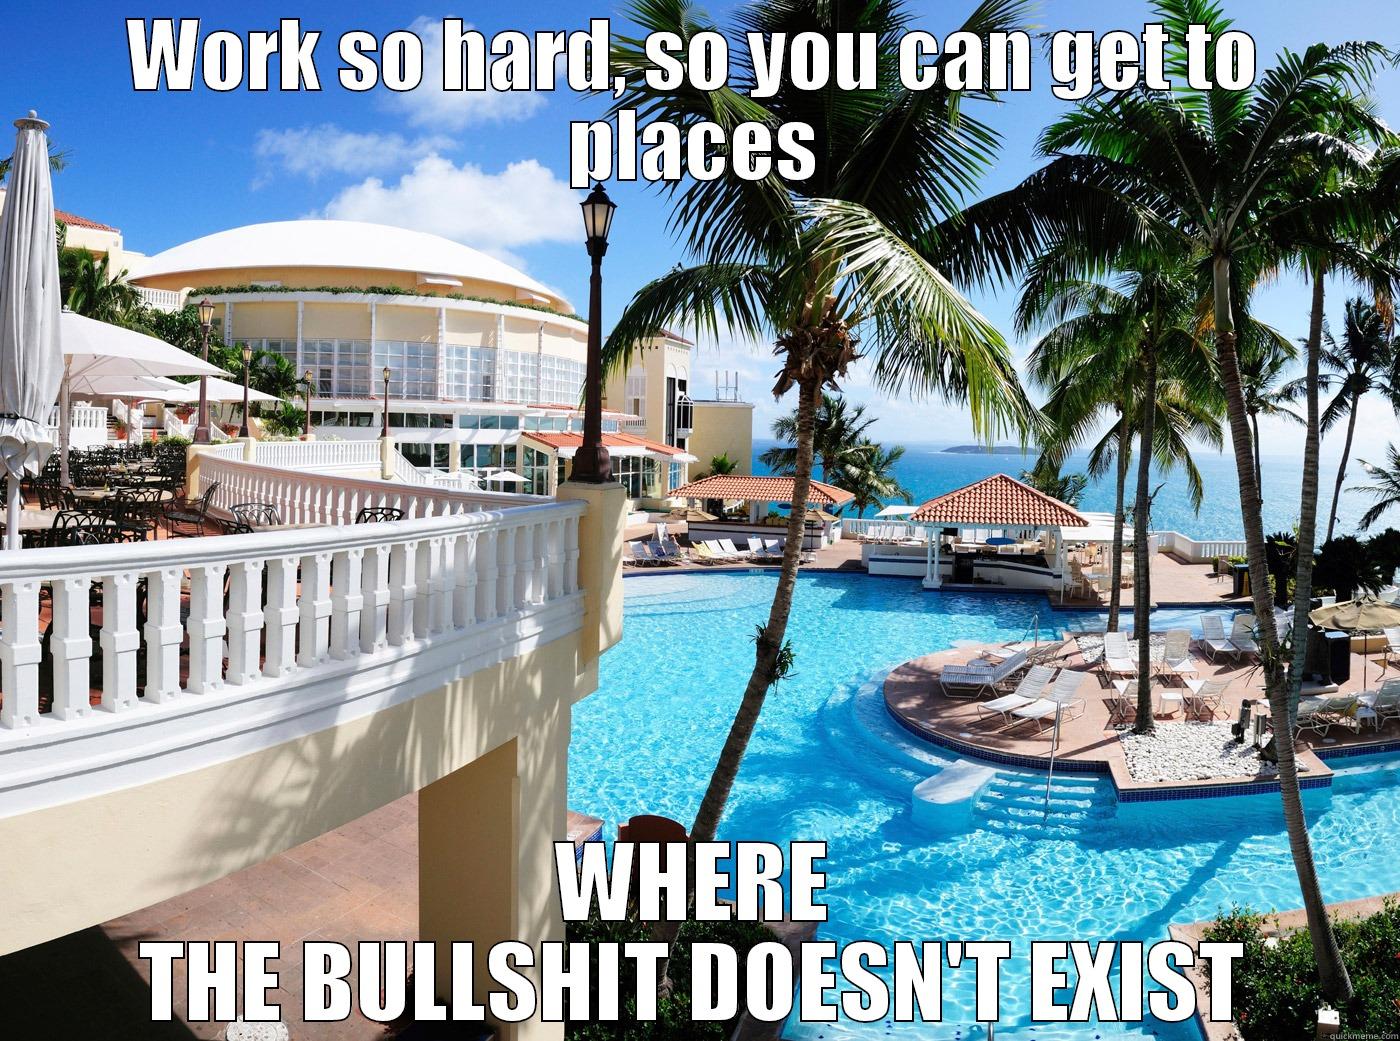 hankw hebd - WORK SO HARD, SO YOU CAN GET TO PLACES WHERE THE BULLSHIT DOESN'T EXIST Misc